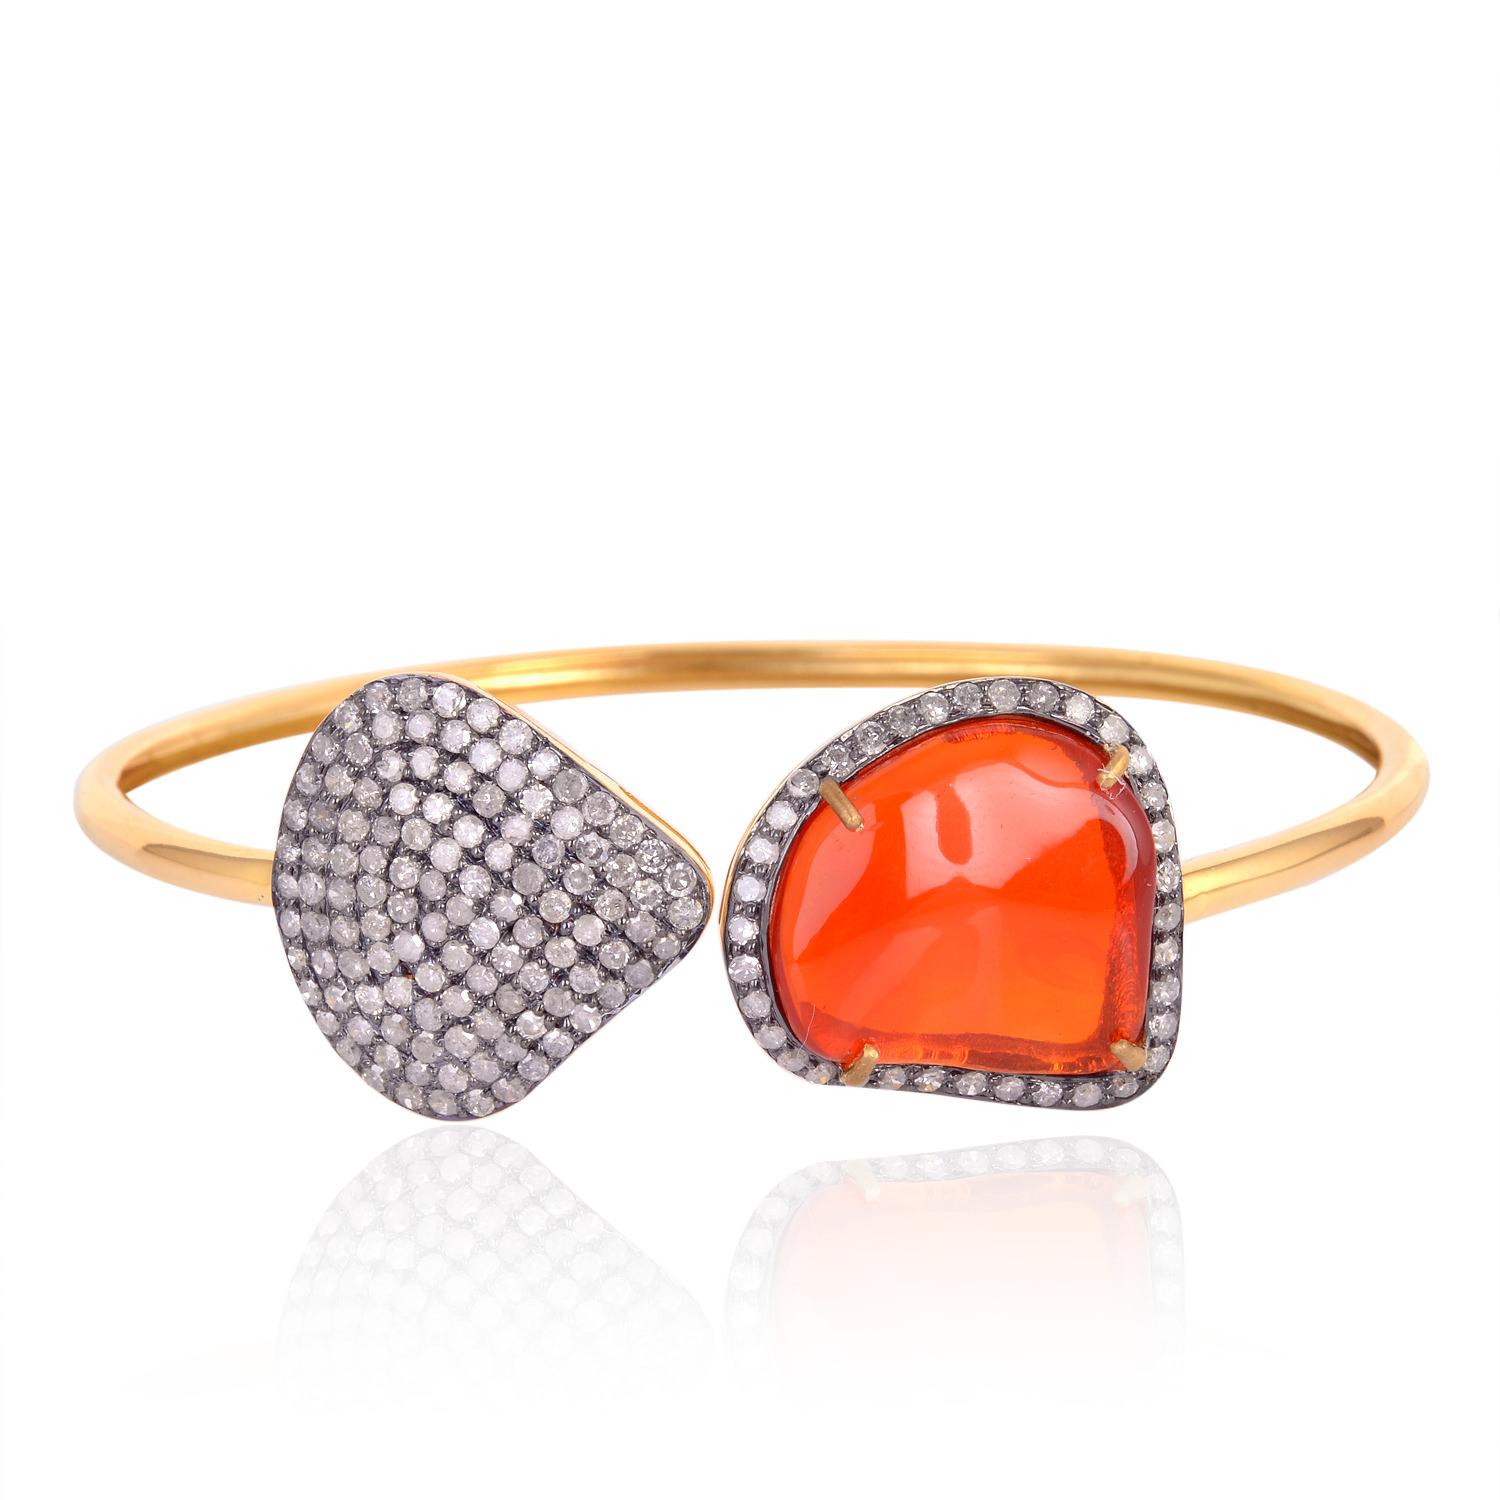 Fire Opal & Pave Diamonds Bracelet Made in 18k Gold & Silver In New Condition For Sale In New York, NY